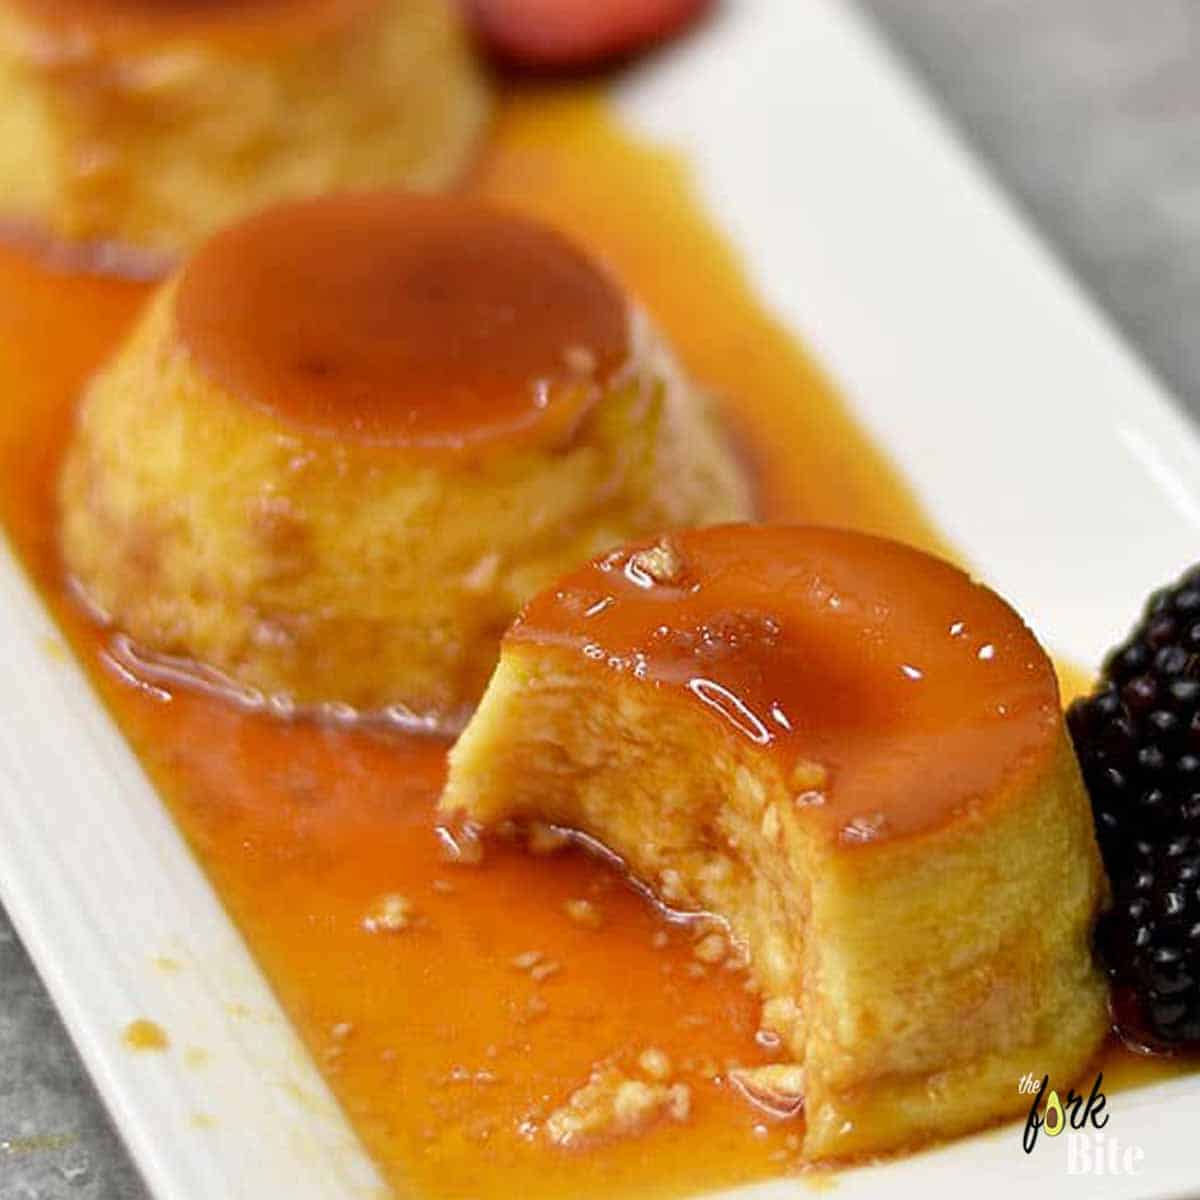 A super easy baked flan recipe that is prepared using a blender. It's great served cold and has a creamy texture like custard.